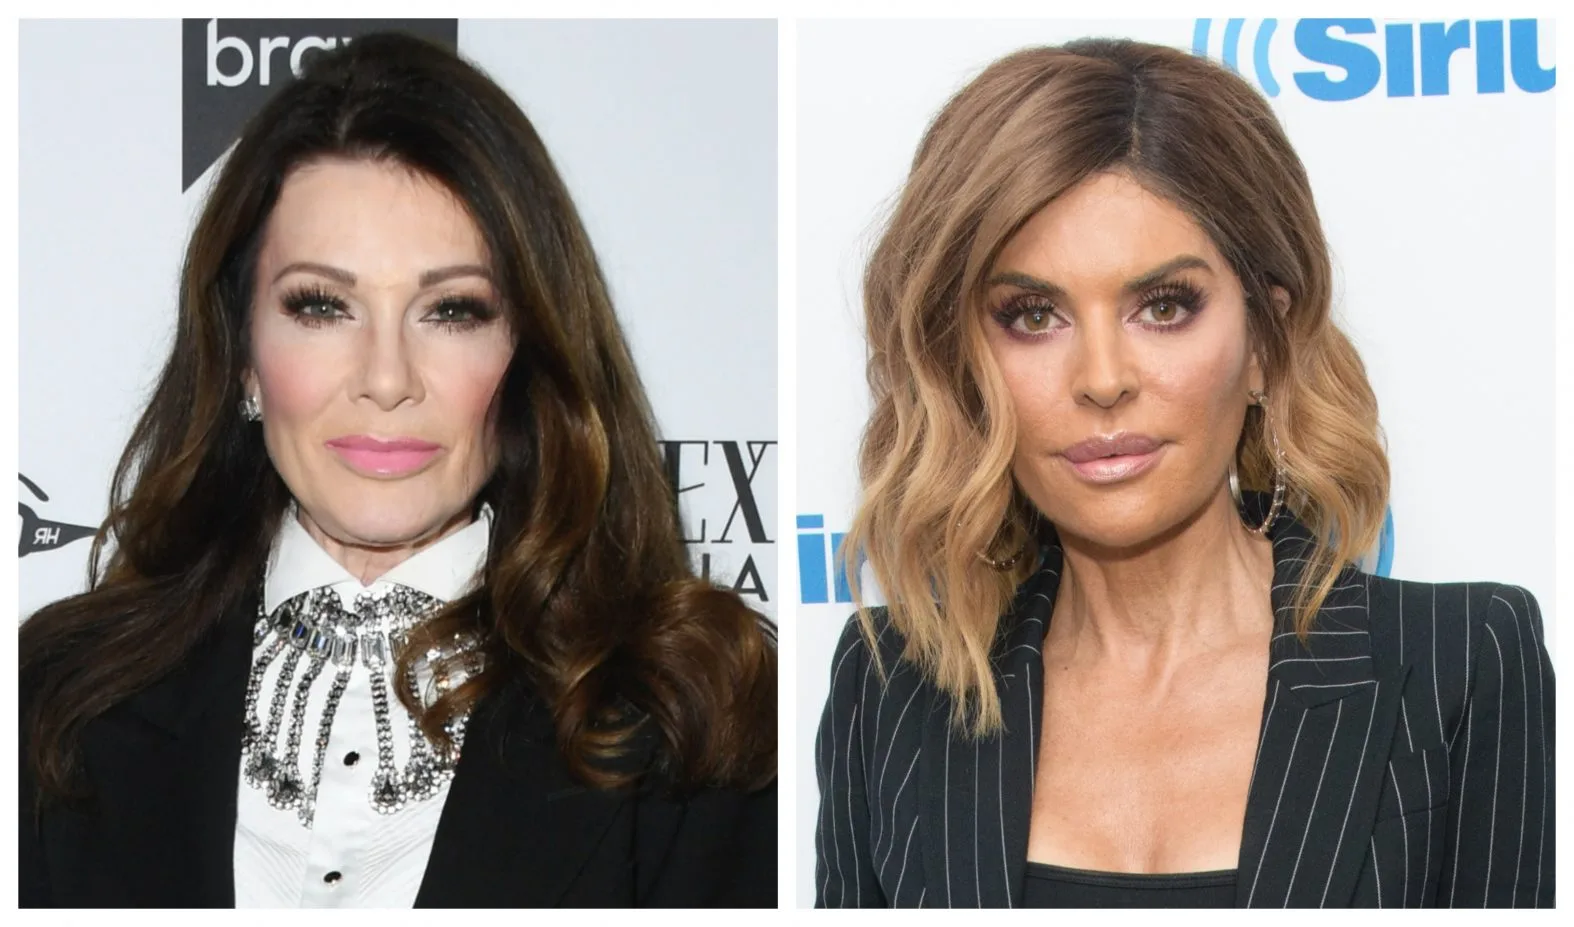 Lisa Vanderpump Claps Back At ‘RHOBH’ Producer For ‘Puppygate’ Scandal & Lisa Rinna Admits To Scheming With LVP In Munchausen Plot Against Yolanda Hadid!